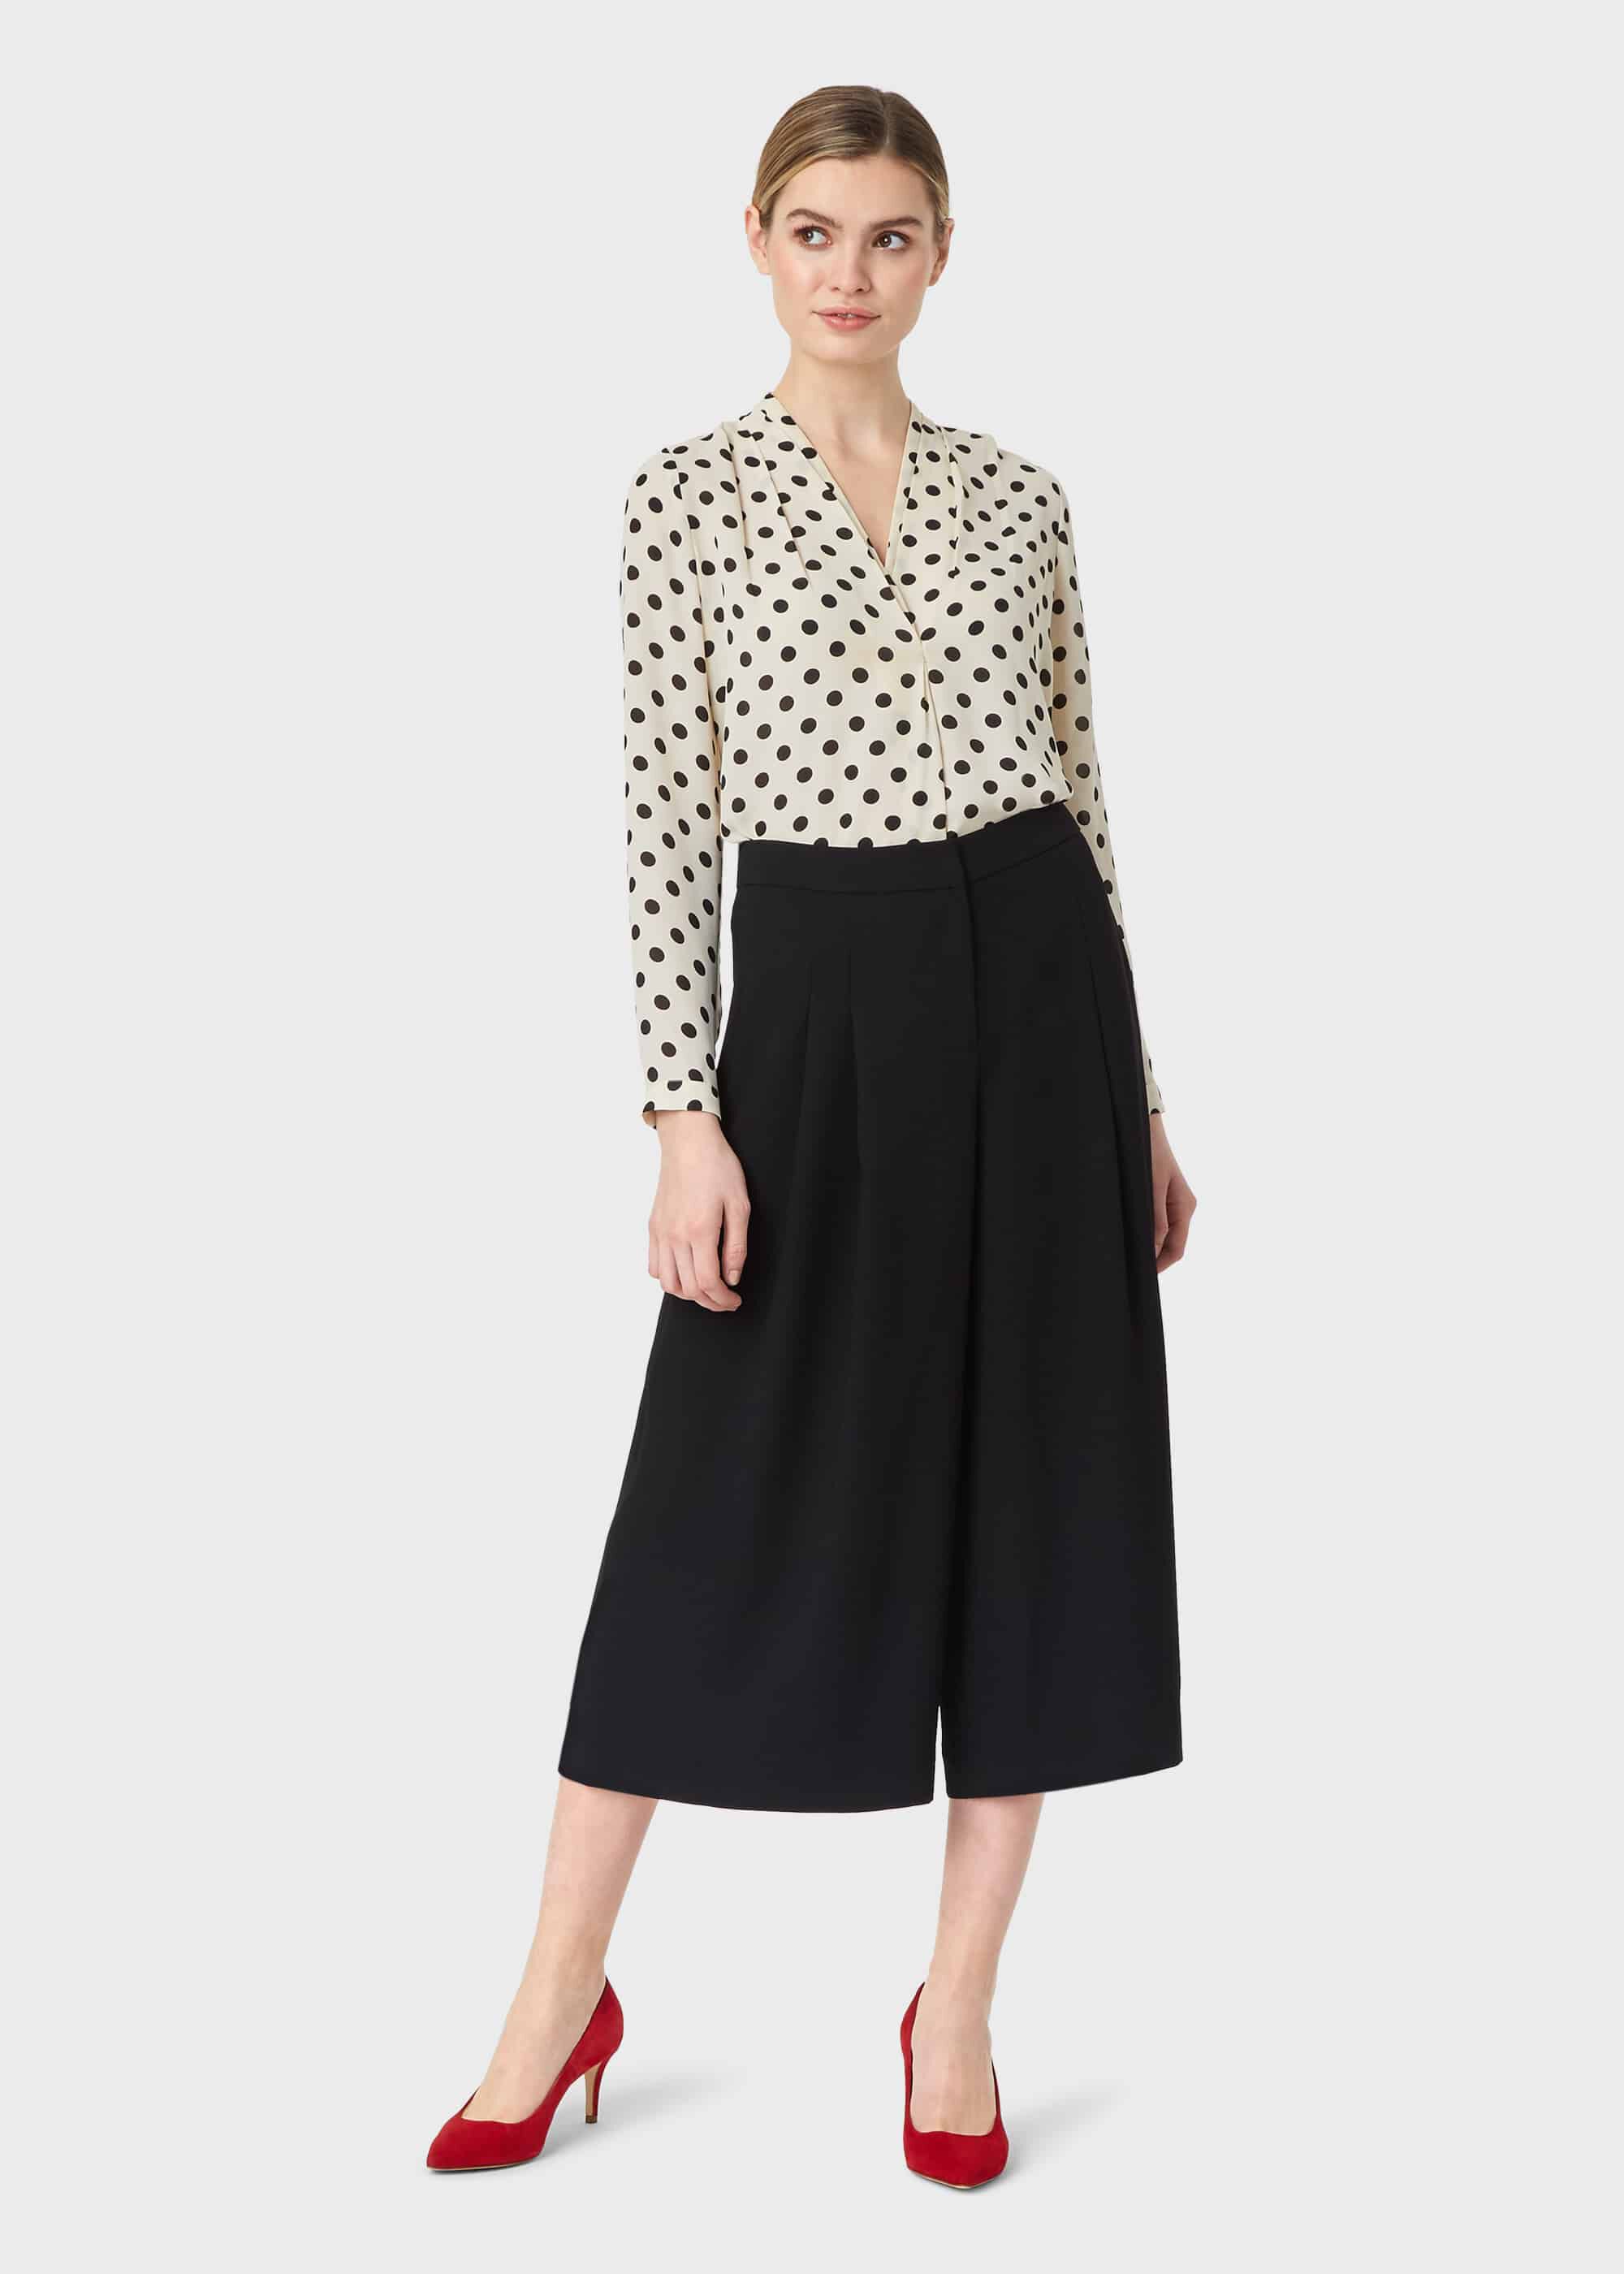 Sale Trousers | Women's Work Trousers, Culottes & Jeans | Hobbs 